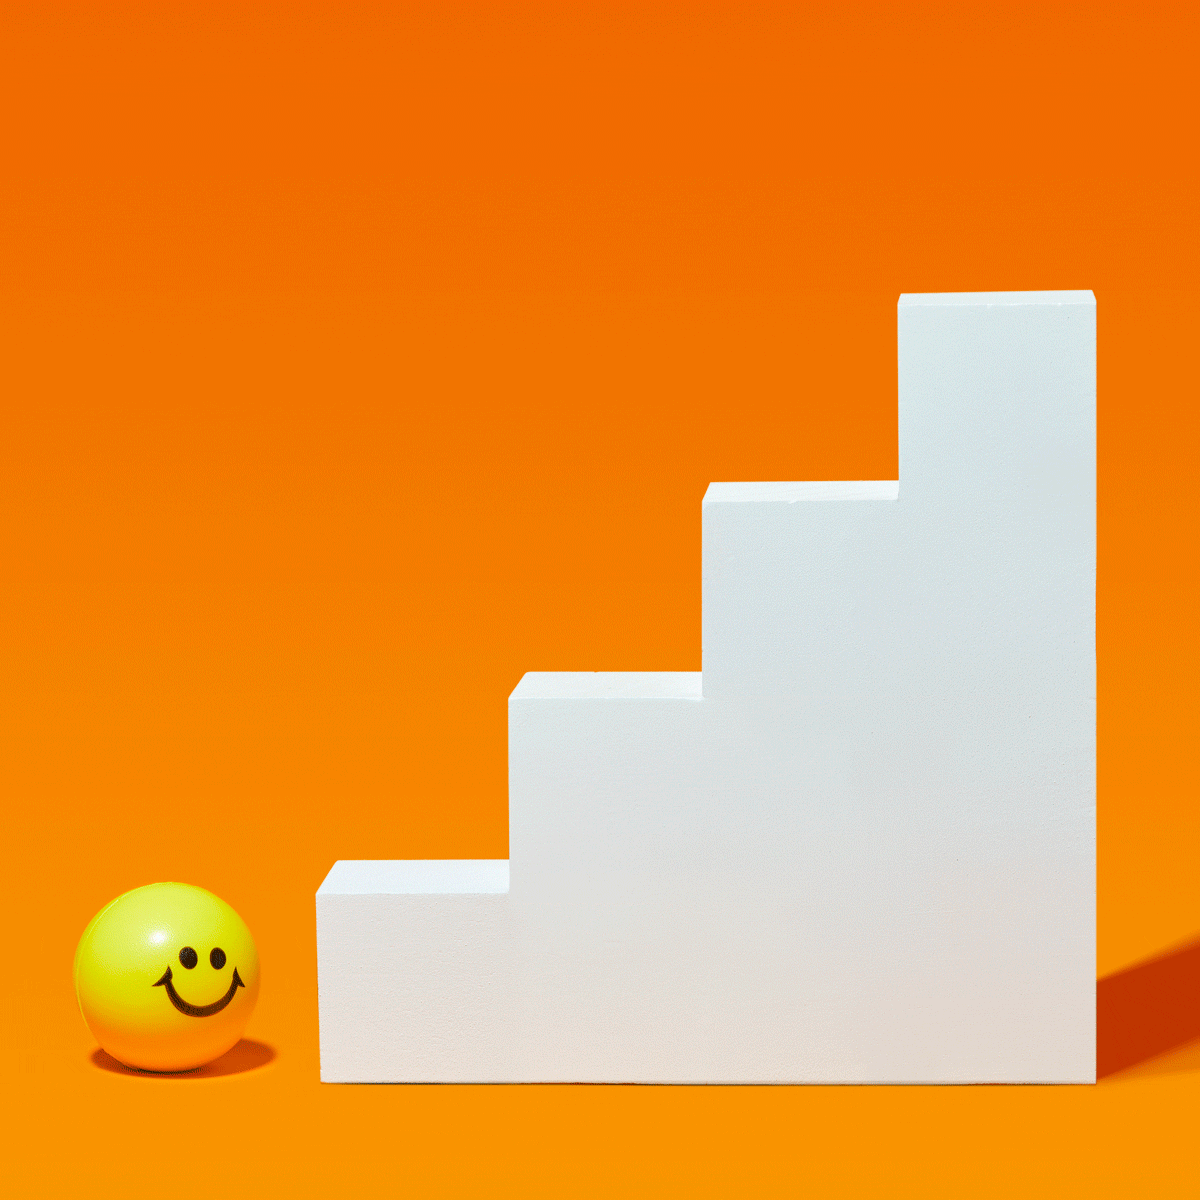 yellow smiley face ball bouncing up white staircase against an orange background